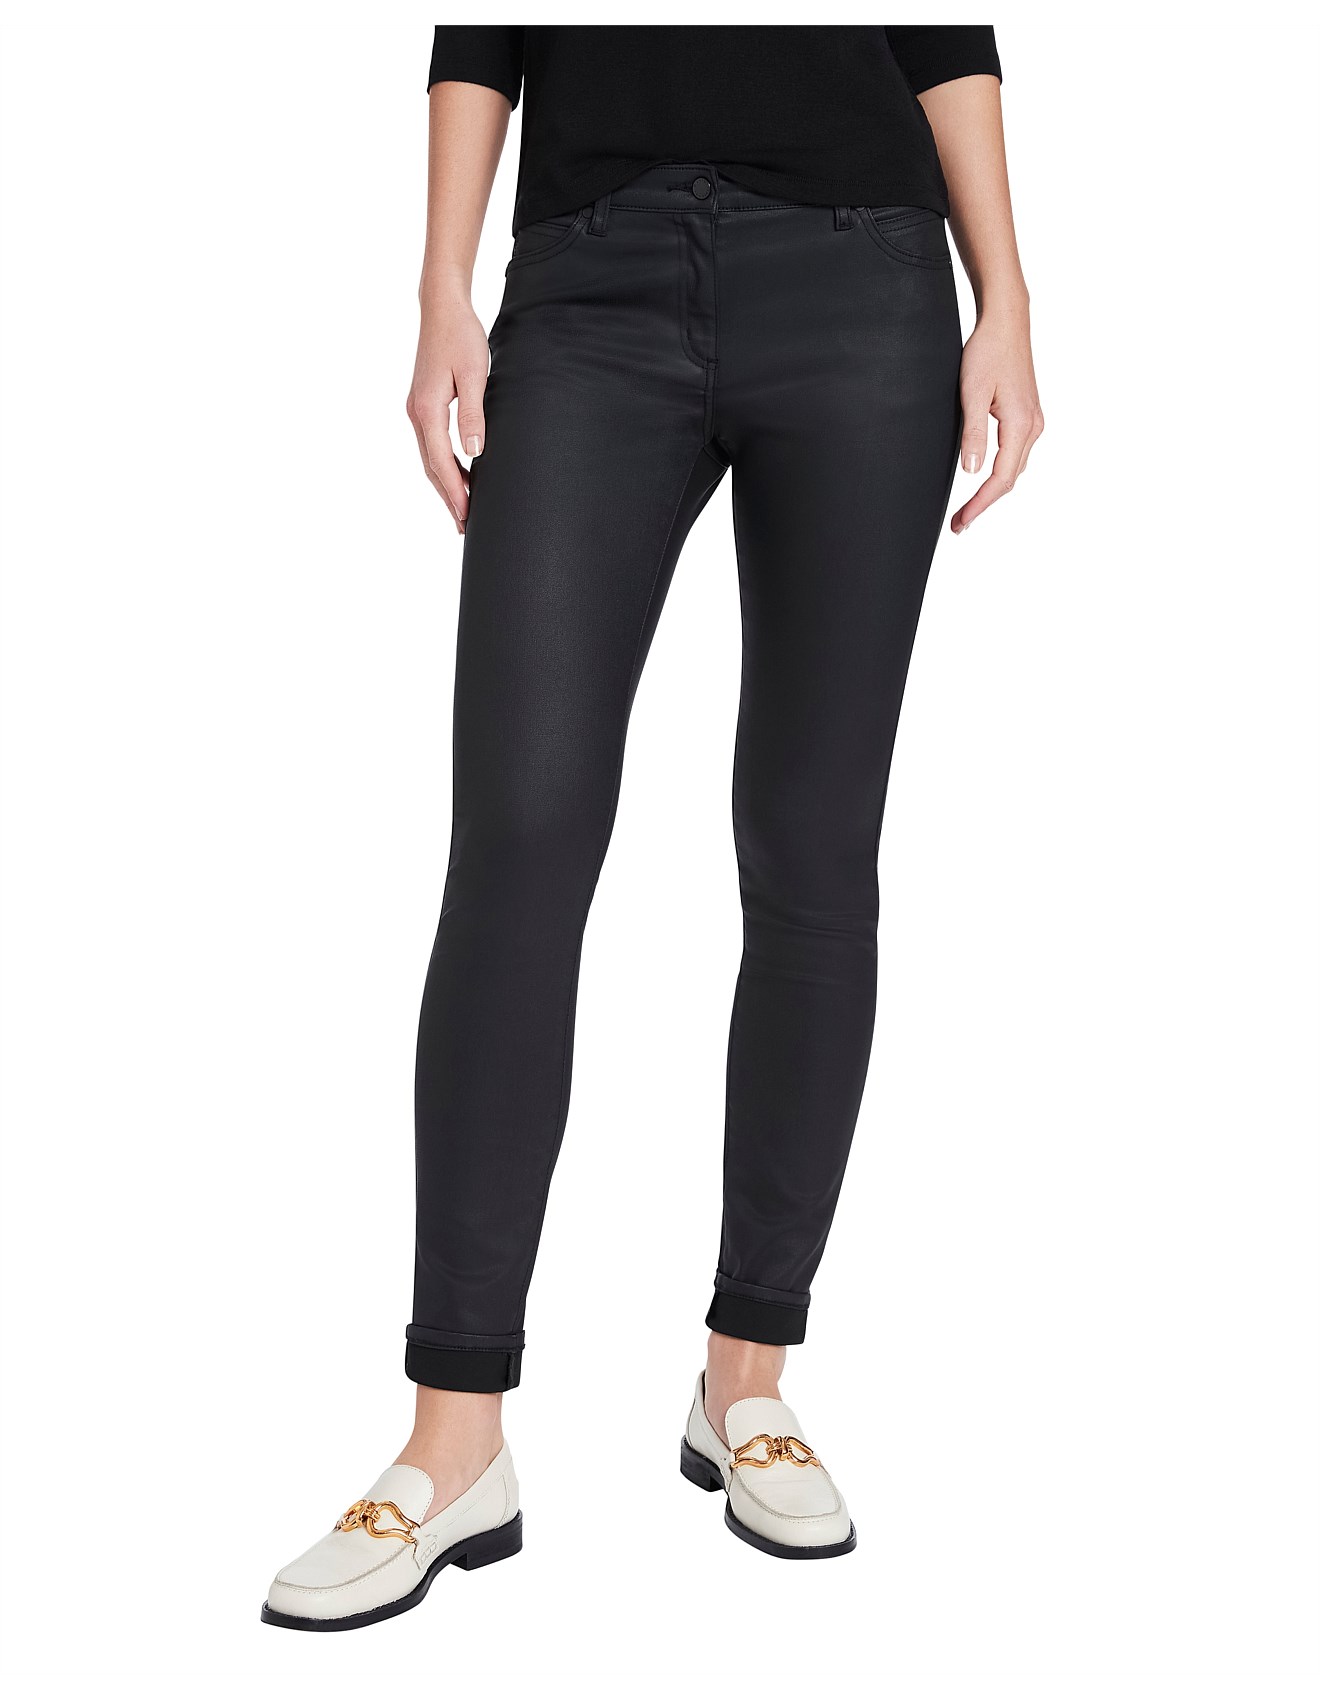 Get David Lawrence Top Sellers COATED JACKIE SKINNY JEAN Now at a ...